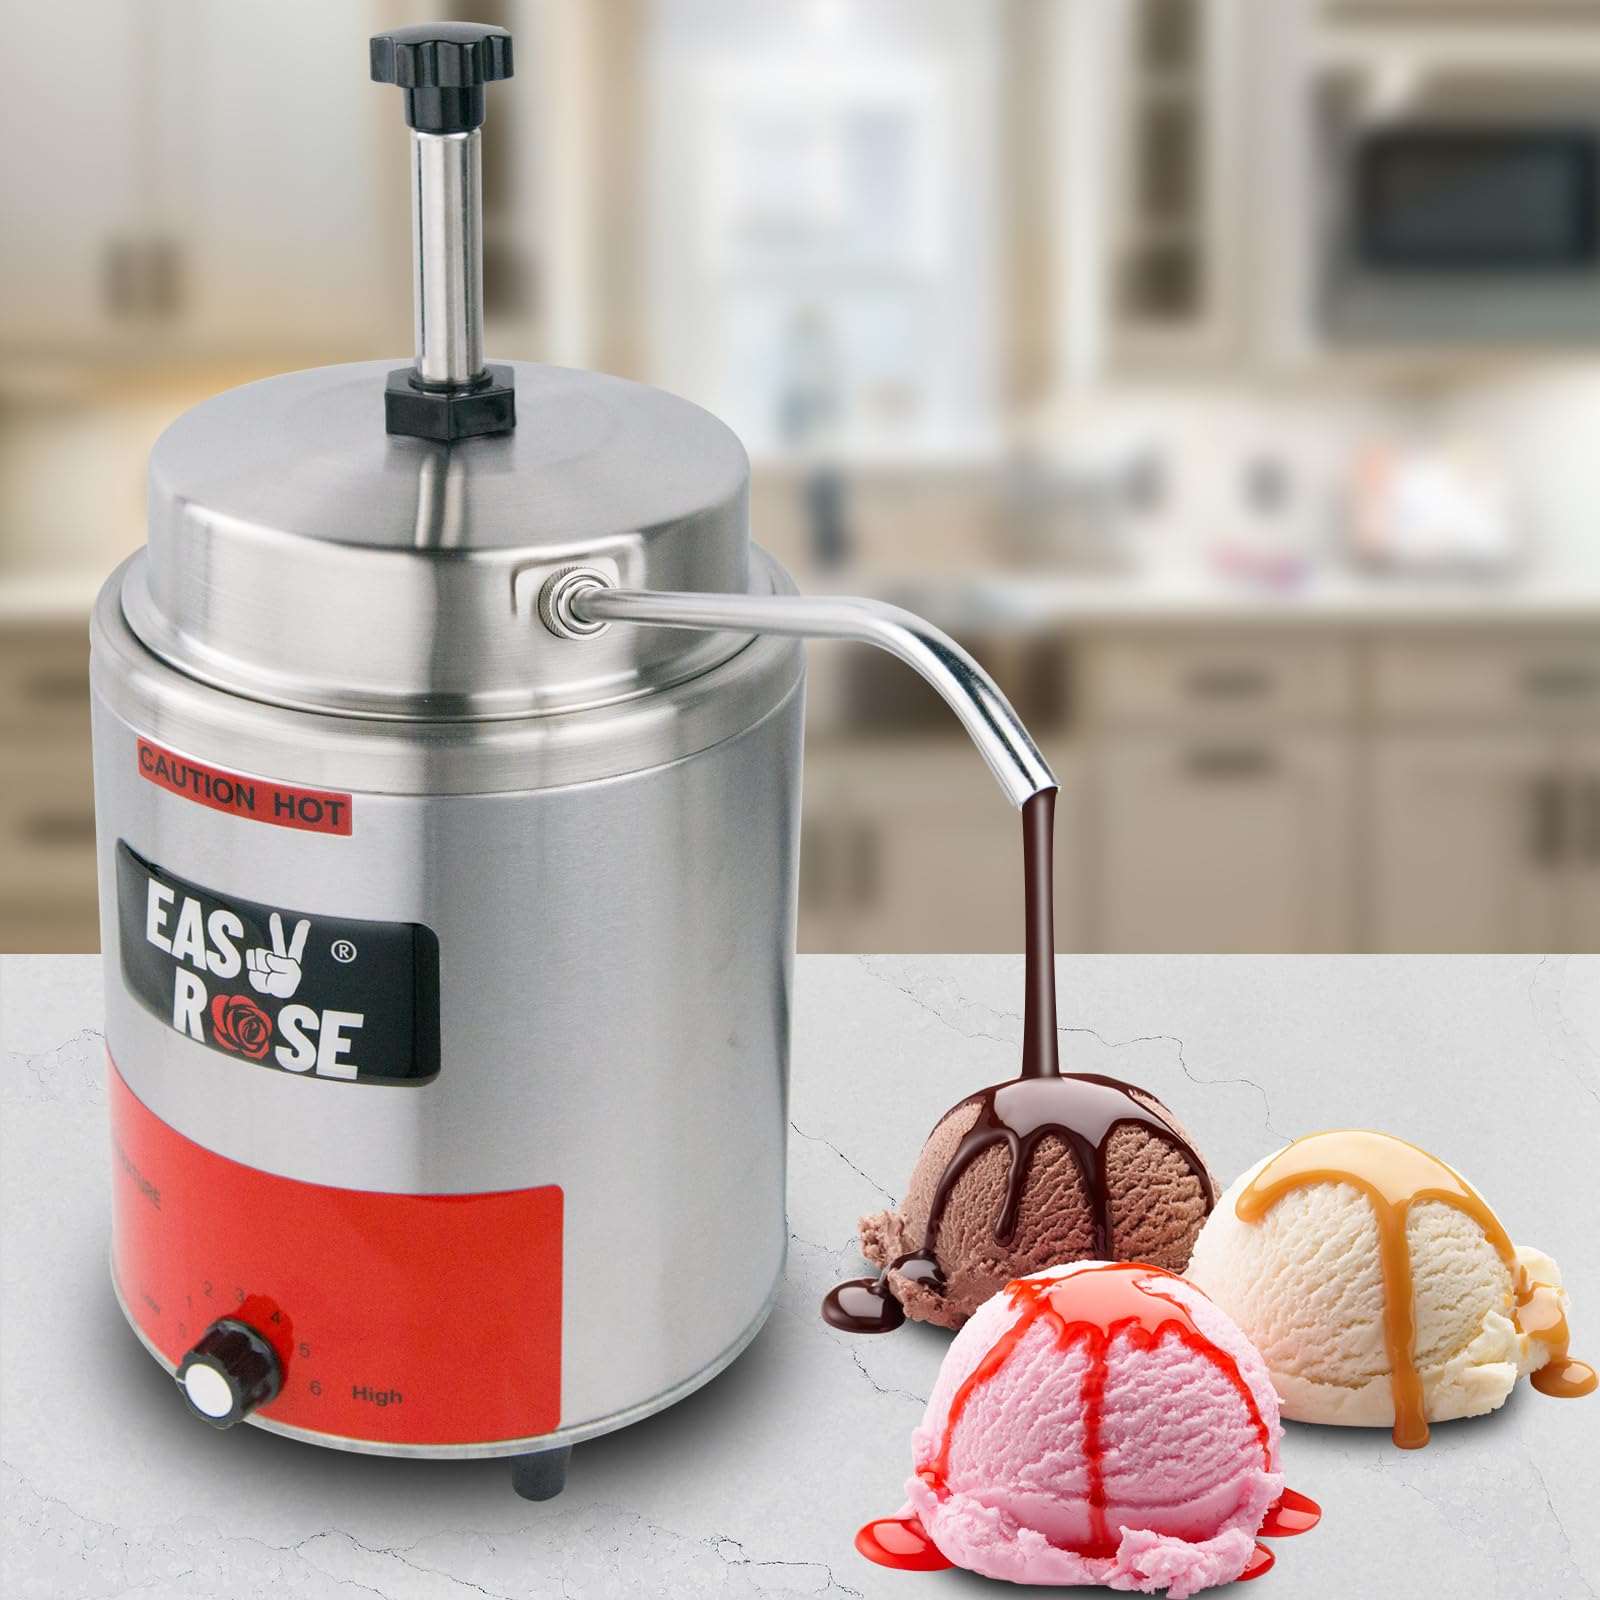 1/2/3 Grids Sauce Bottle Warmer Electric Hot Chocolate Cheese Soy Sauce  Heater Jam Sauce Dispenser, 220V From Beijamei_nancy001, $161.91